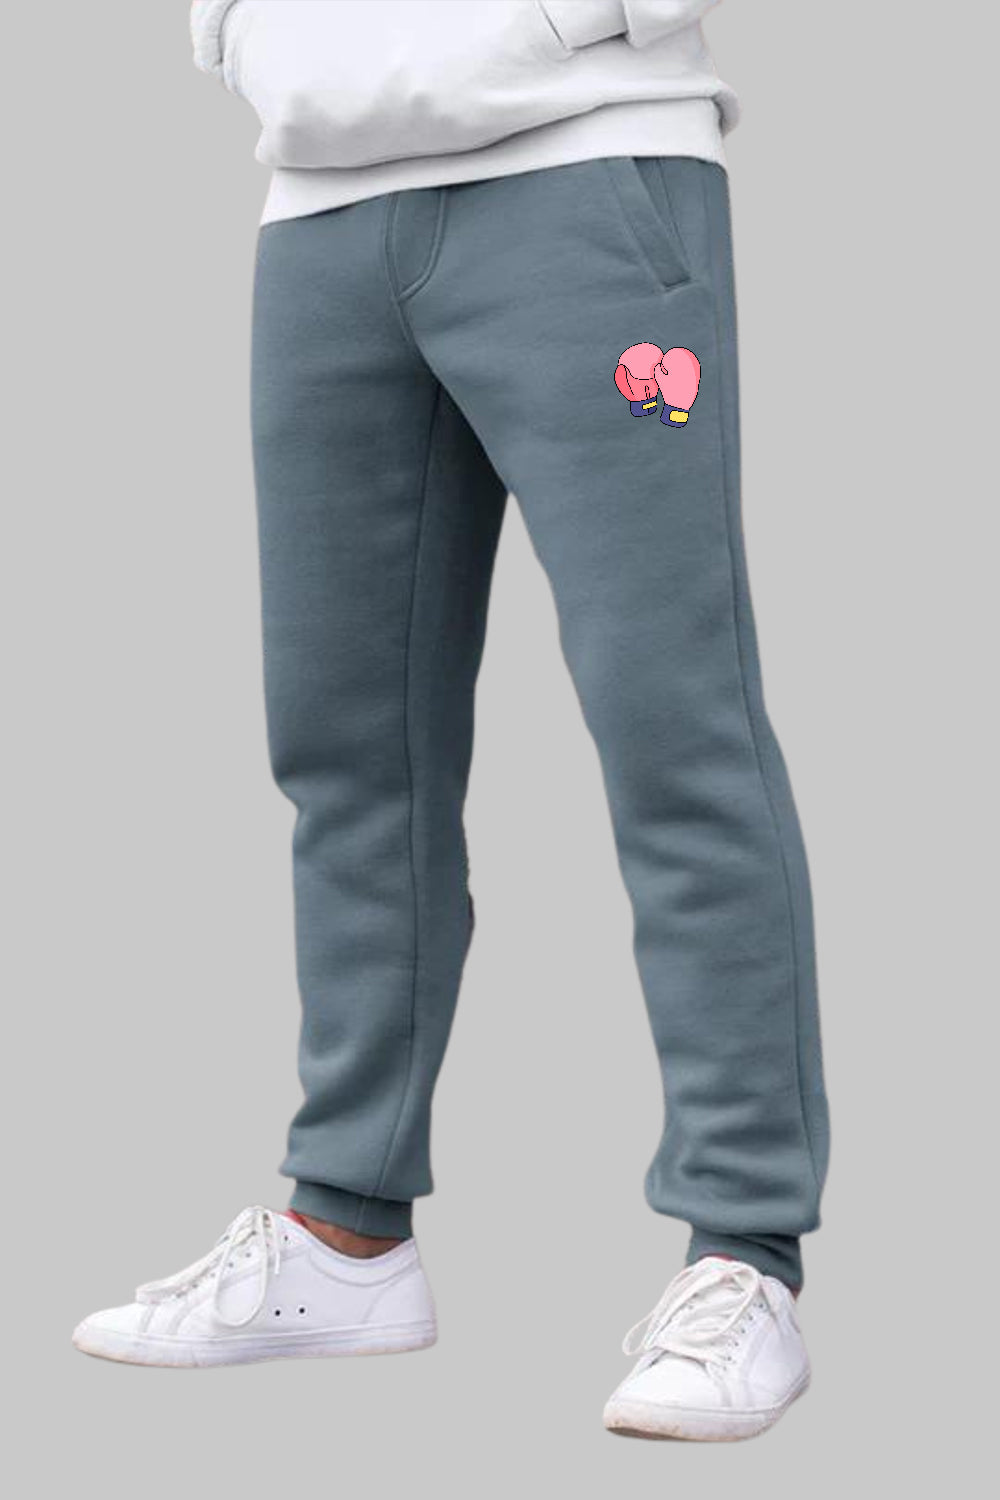 Boxing Graphic Printed Blue Grey Joggers